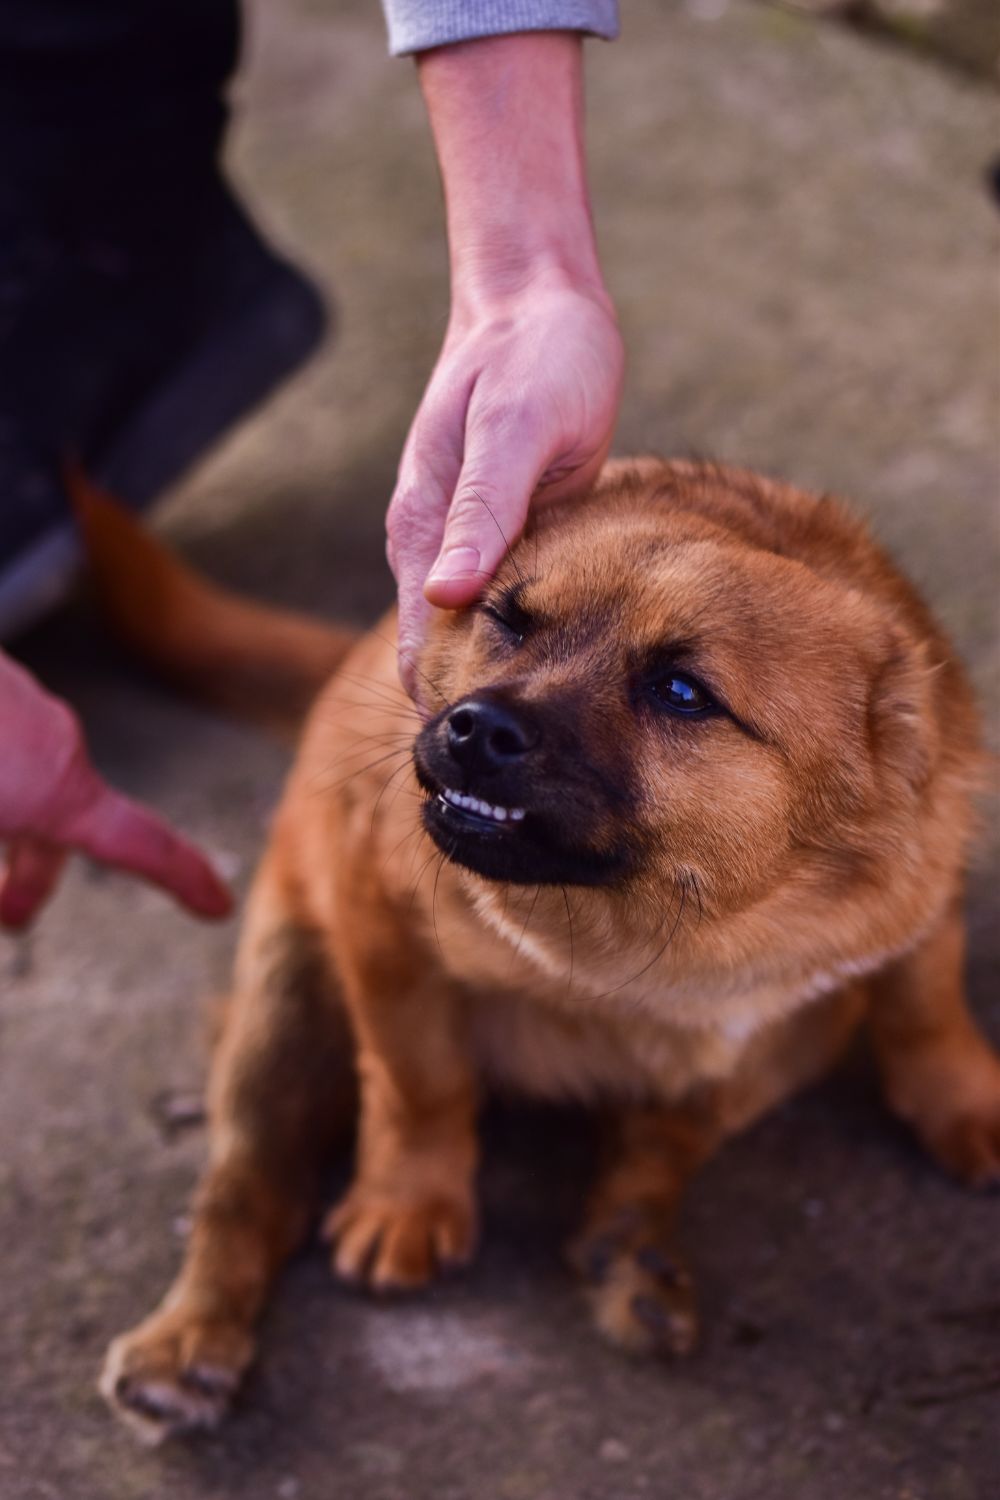 The Legal Process of Filing a Dog Bite Claim What You Need to Know